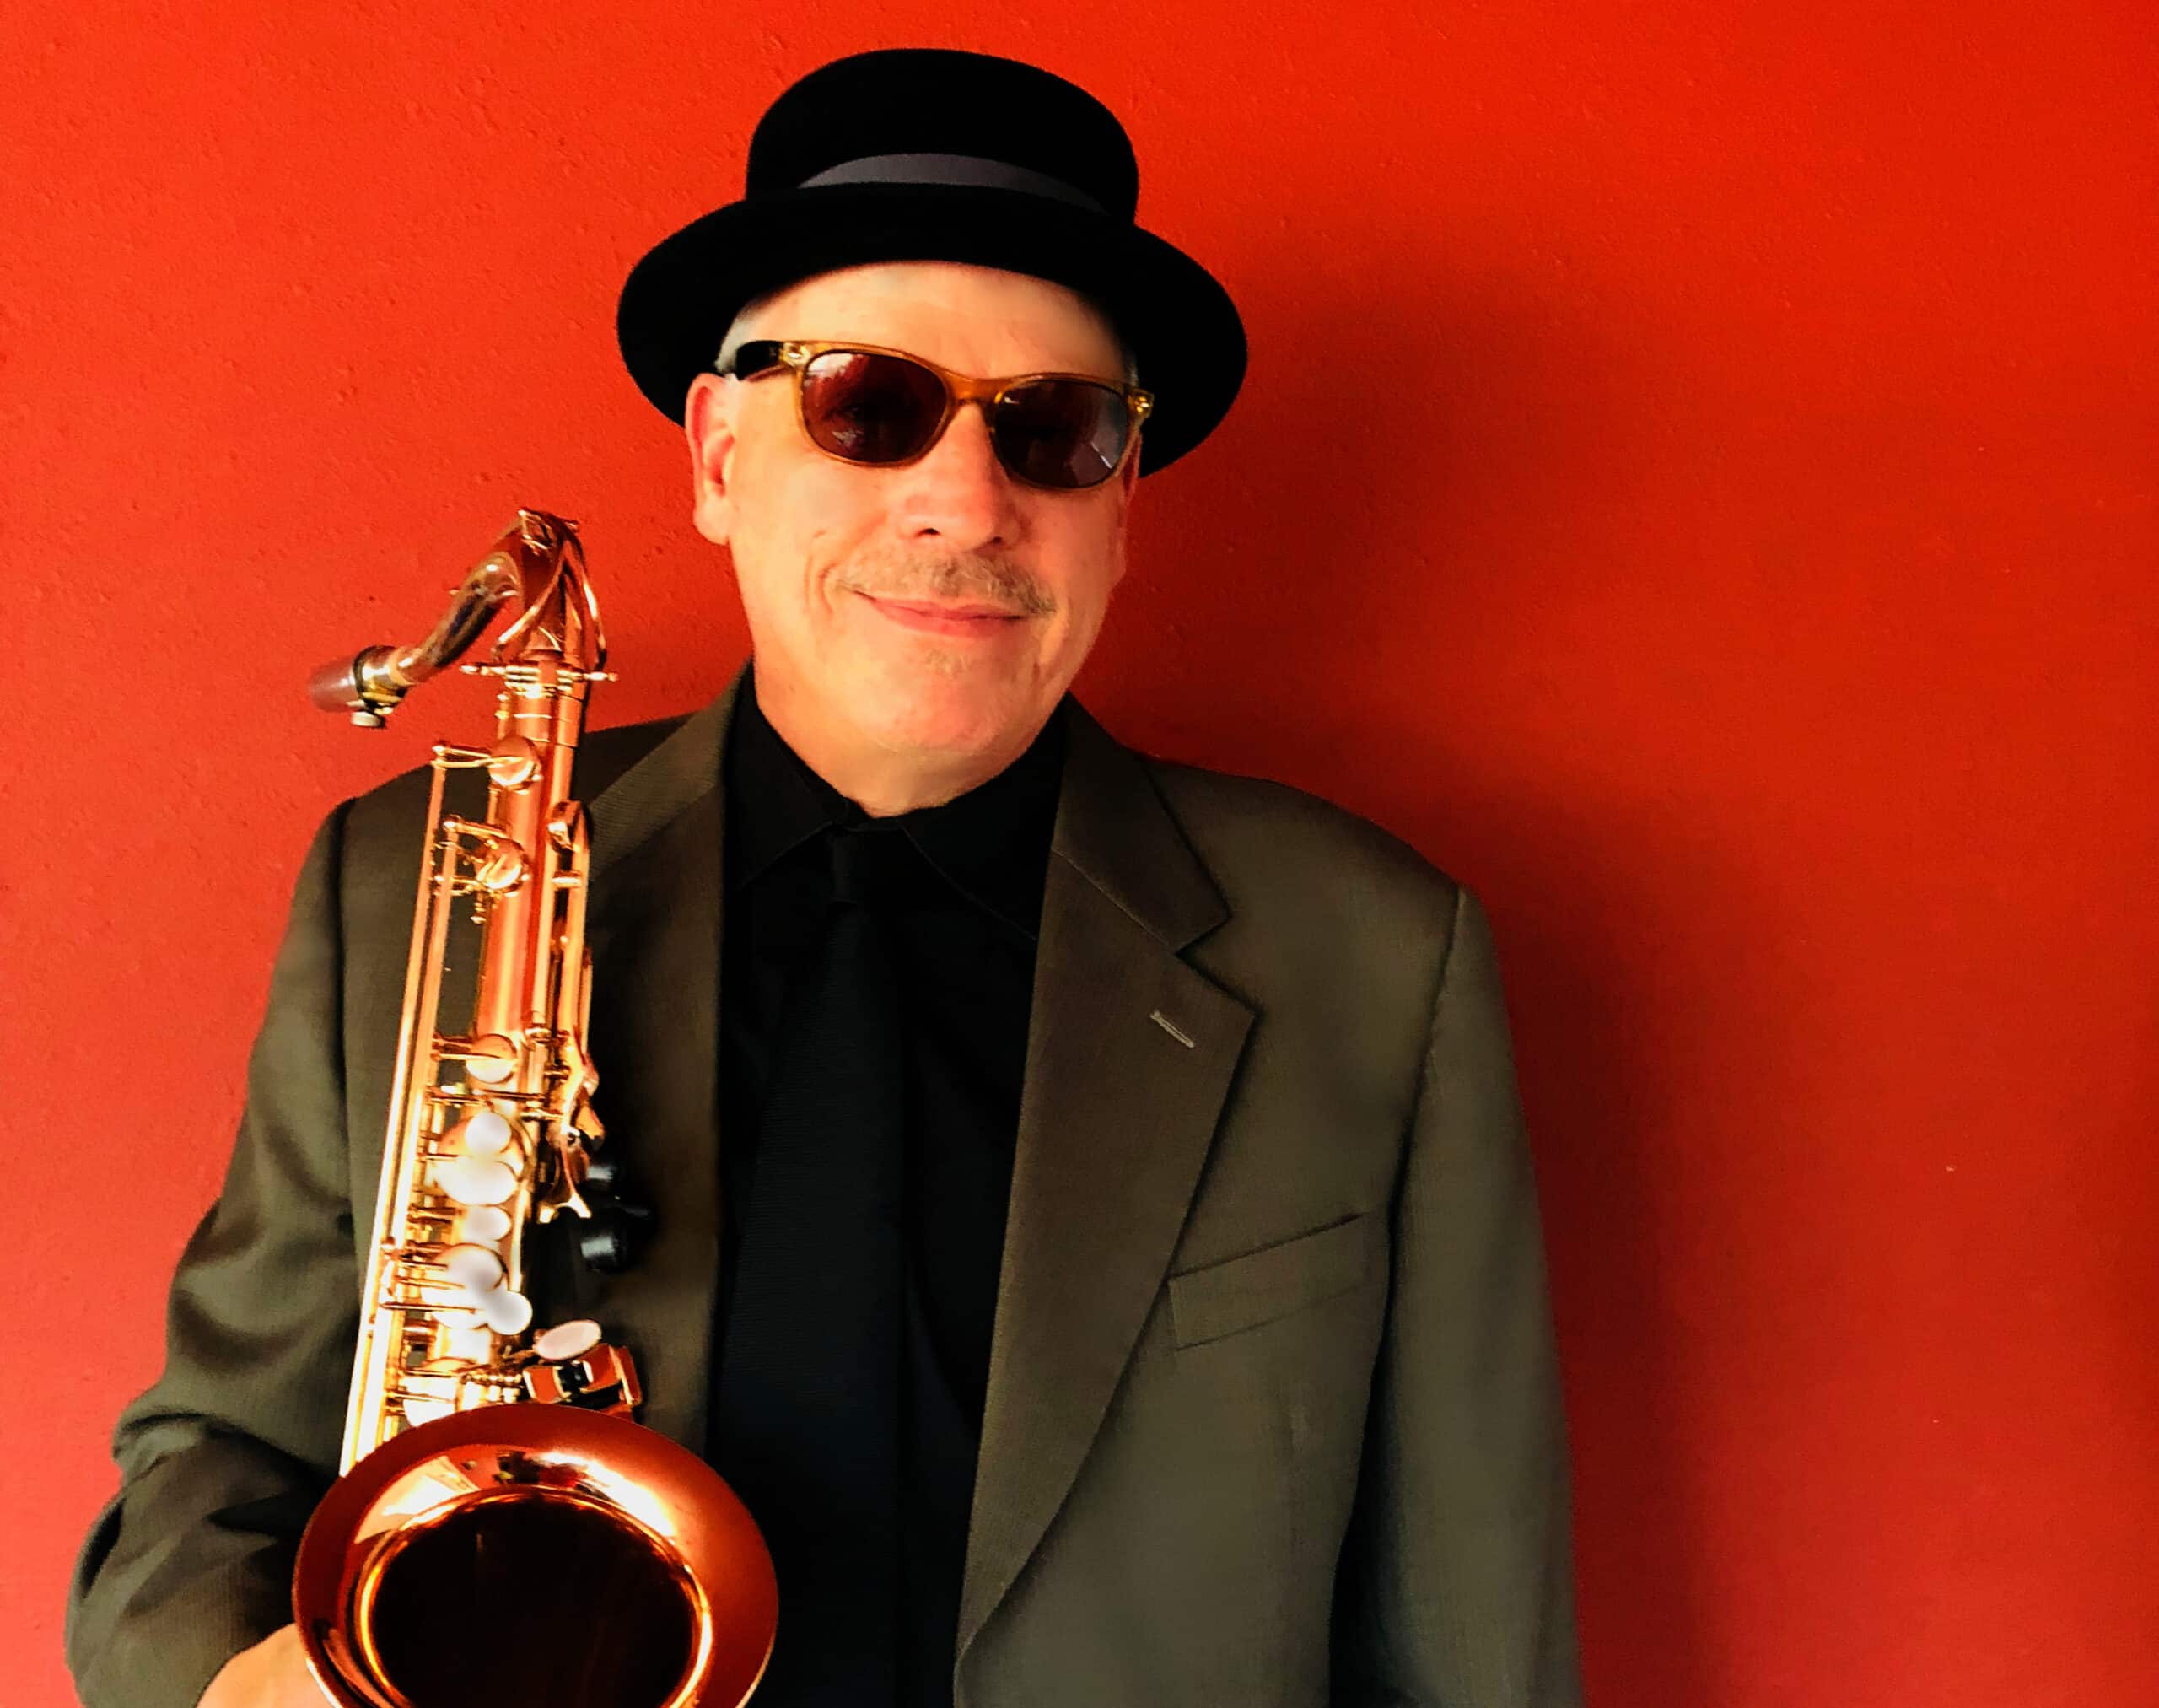 Doug Lawrence stands in front of a red background with his saxophone, wearing a suit jacket, sunglasses and hat